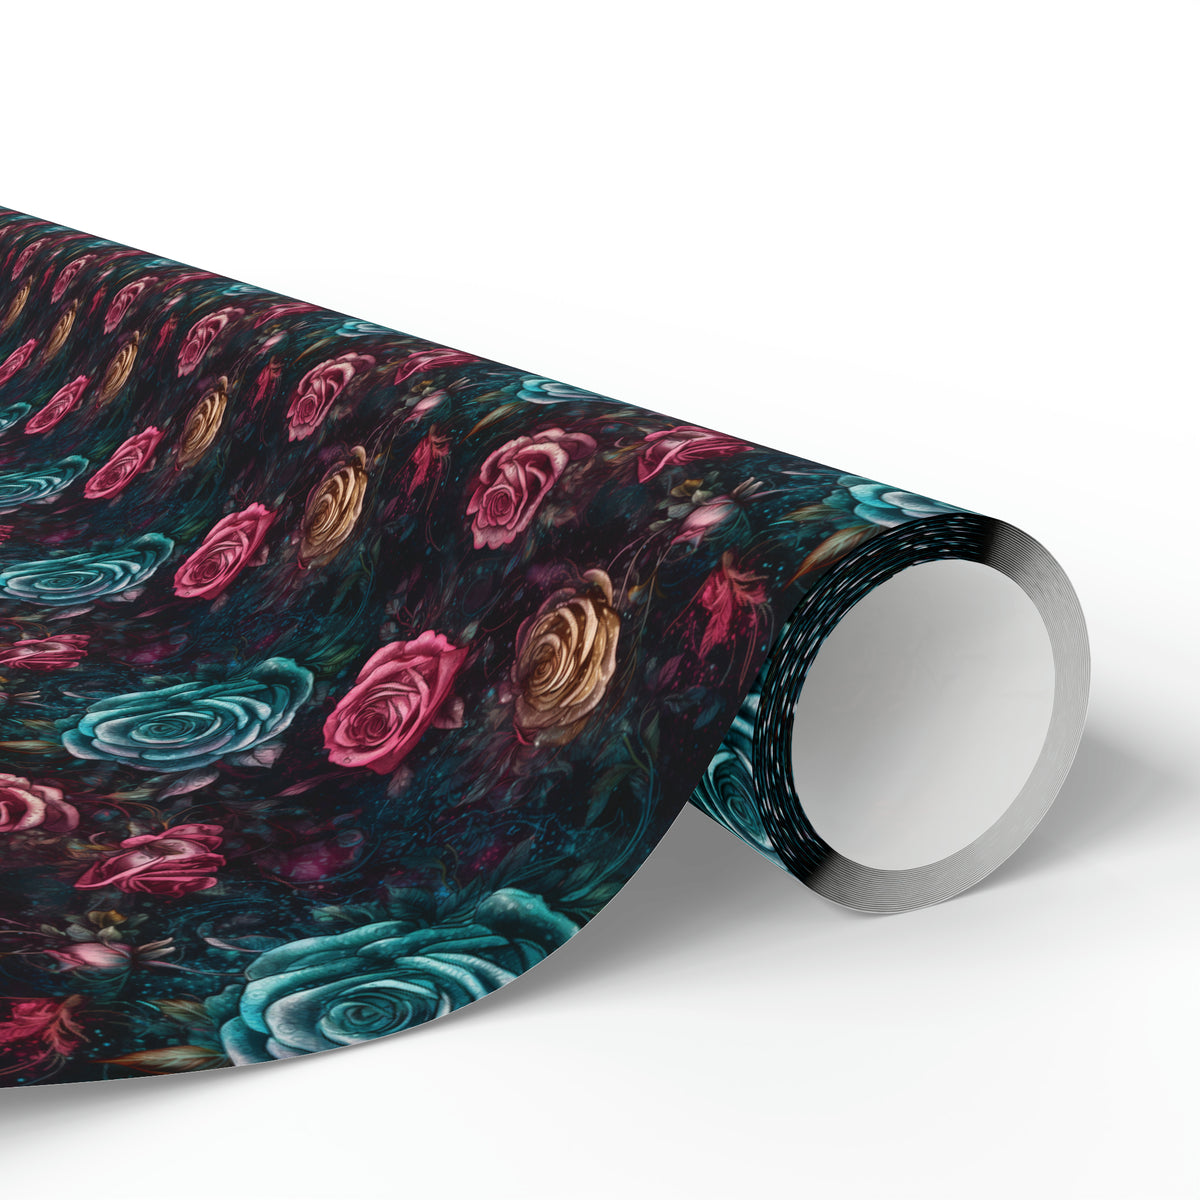 Wrap Your Gifts in Spectacular Galaxy Roses Pattern Paper - Two Sizes, High-Quality Print - Kawaii Esquire